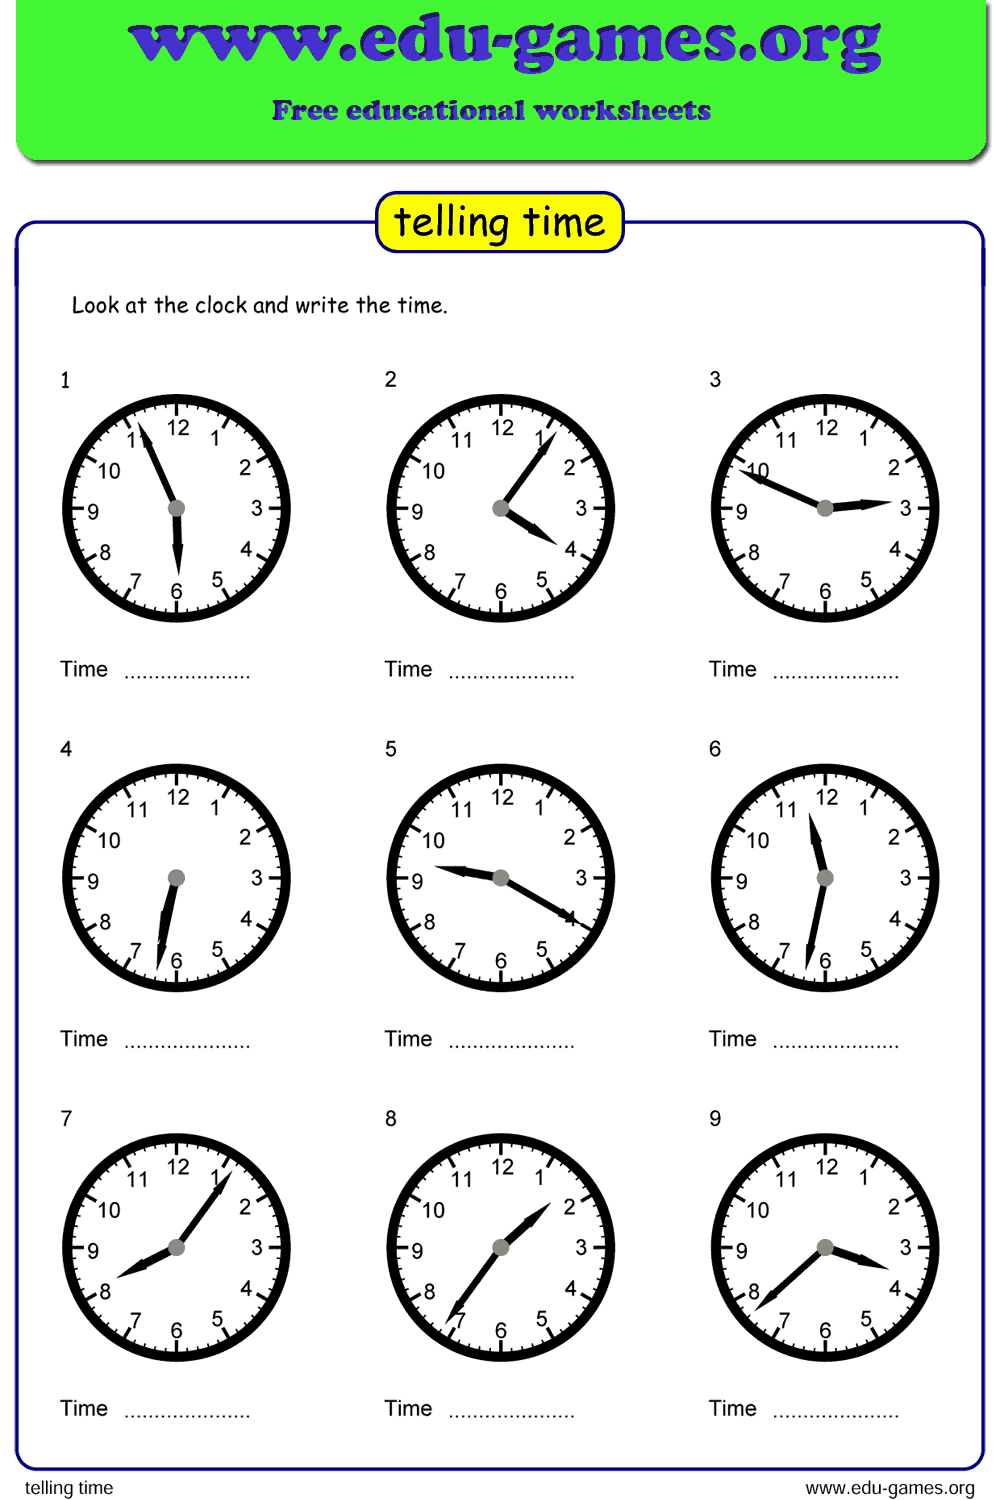 grade-1-worksheets-telling-time-001-coloring-sheets-telling-time